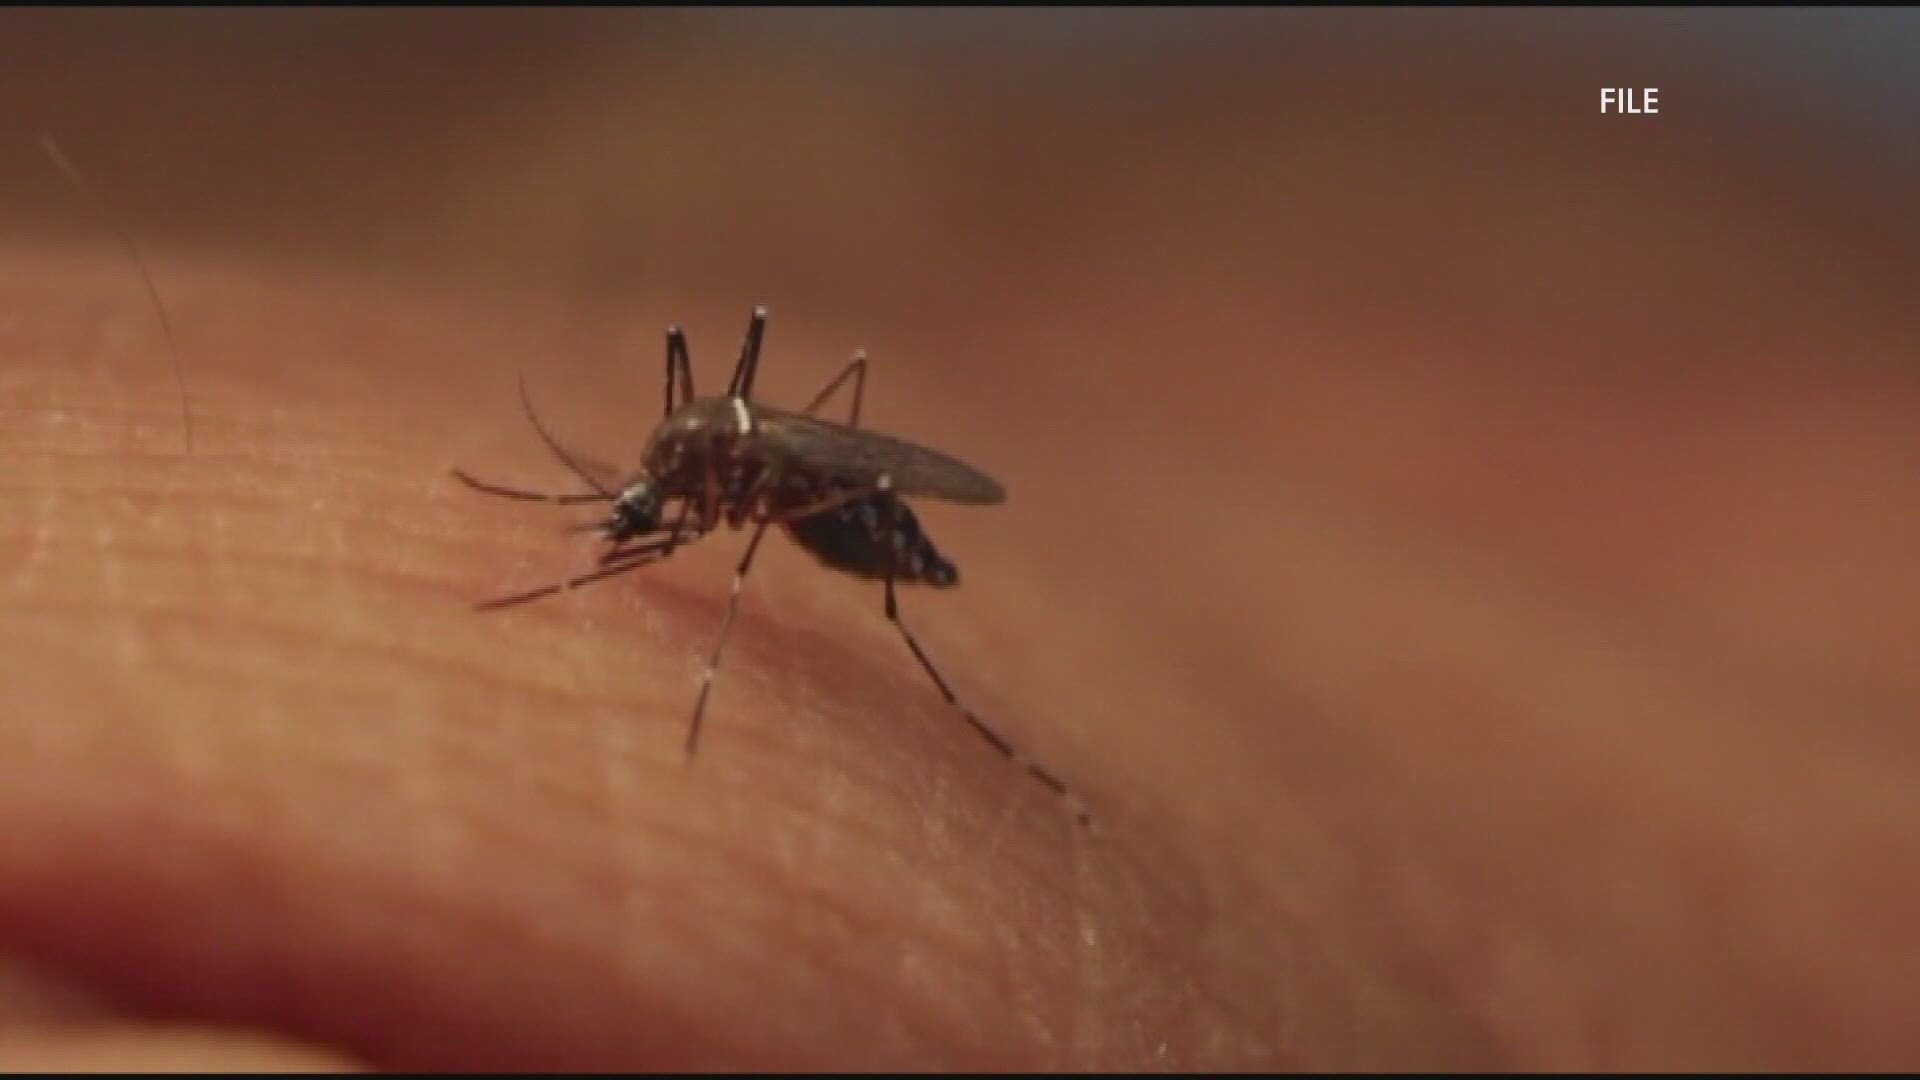 The virus is transmitted by mosquitos. The newest case is a person from Newport.